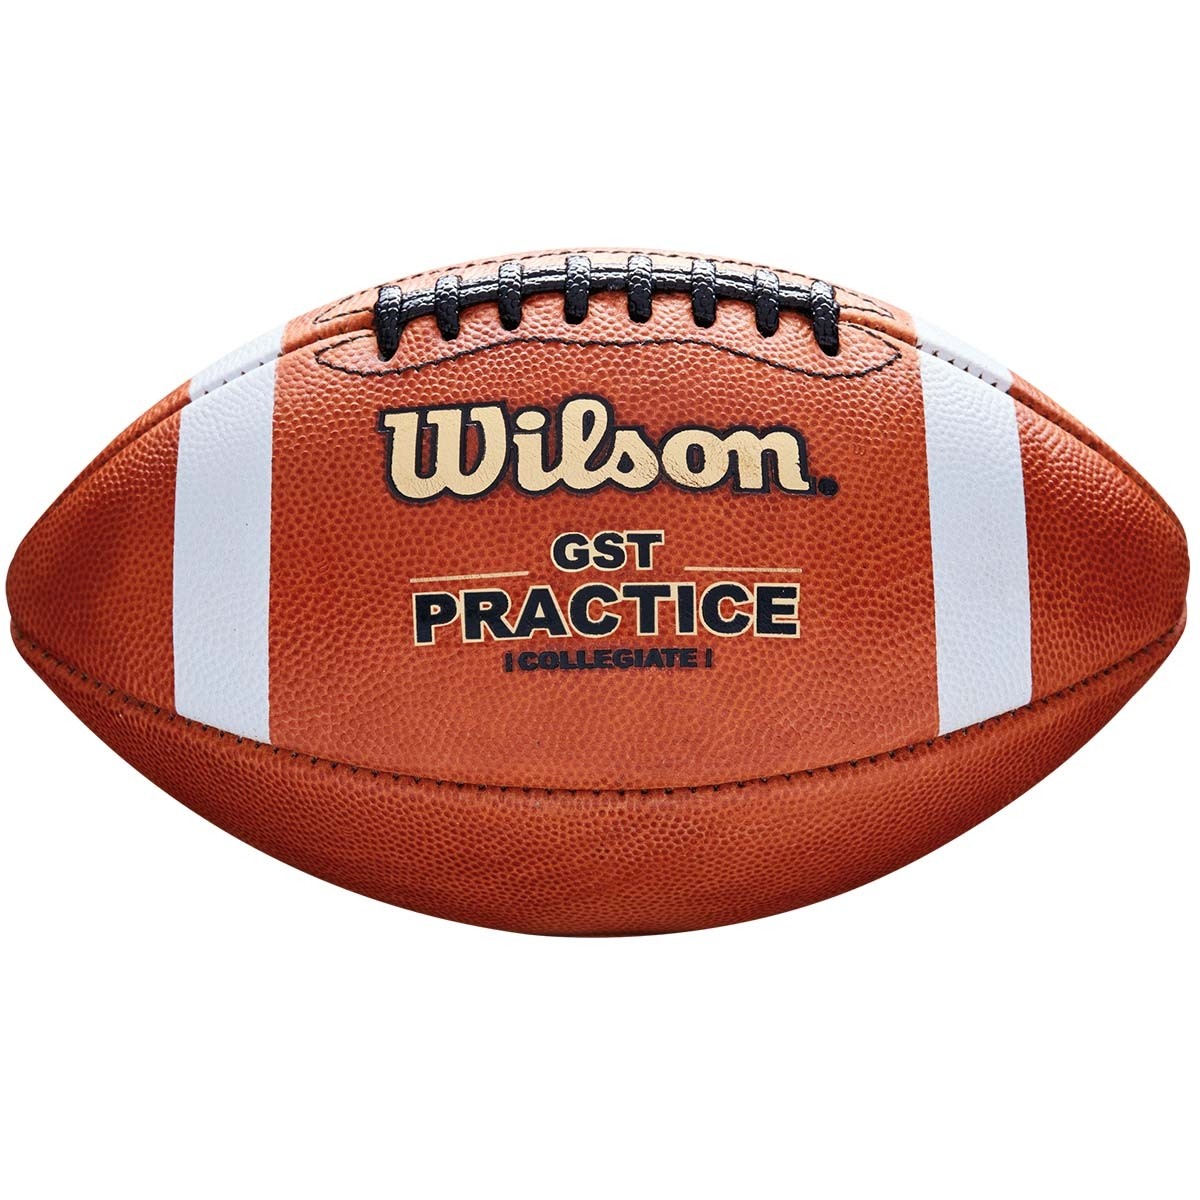 Results Of Spread Betting Calculations From Nov 28 Nfl Game wilson-gst-practice-football-0e2